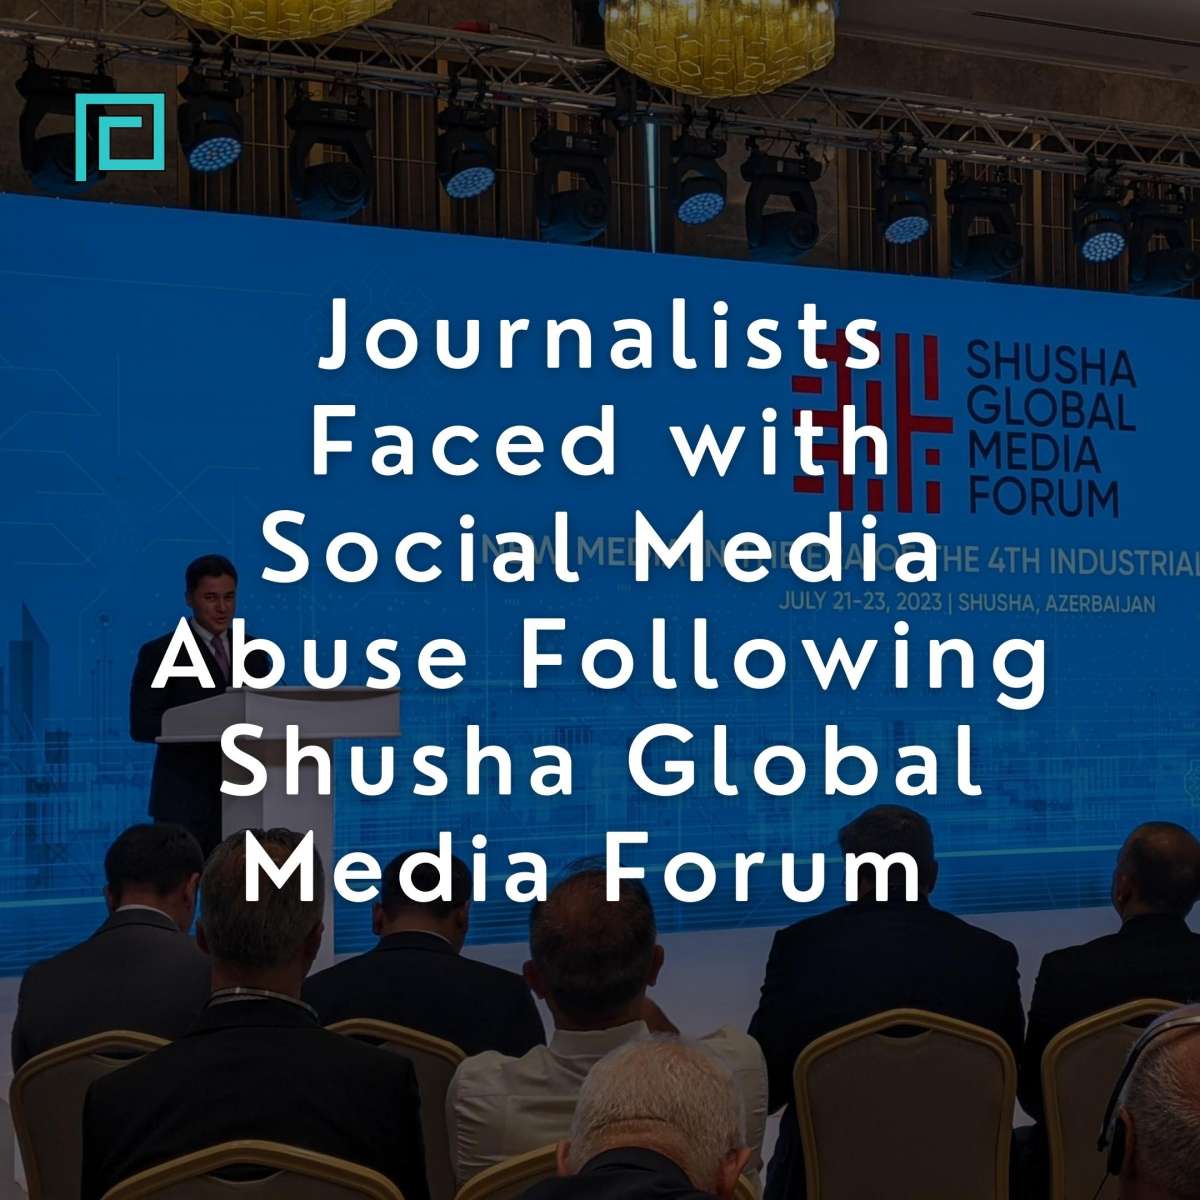 Journalists Faced with Social Media Abuse Following Shusha Global Media Forum